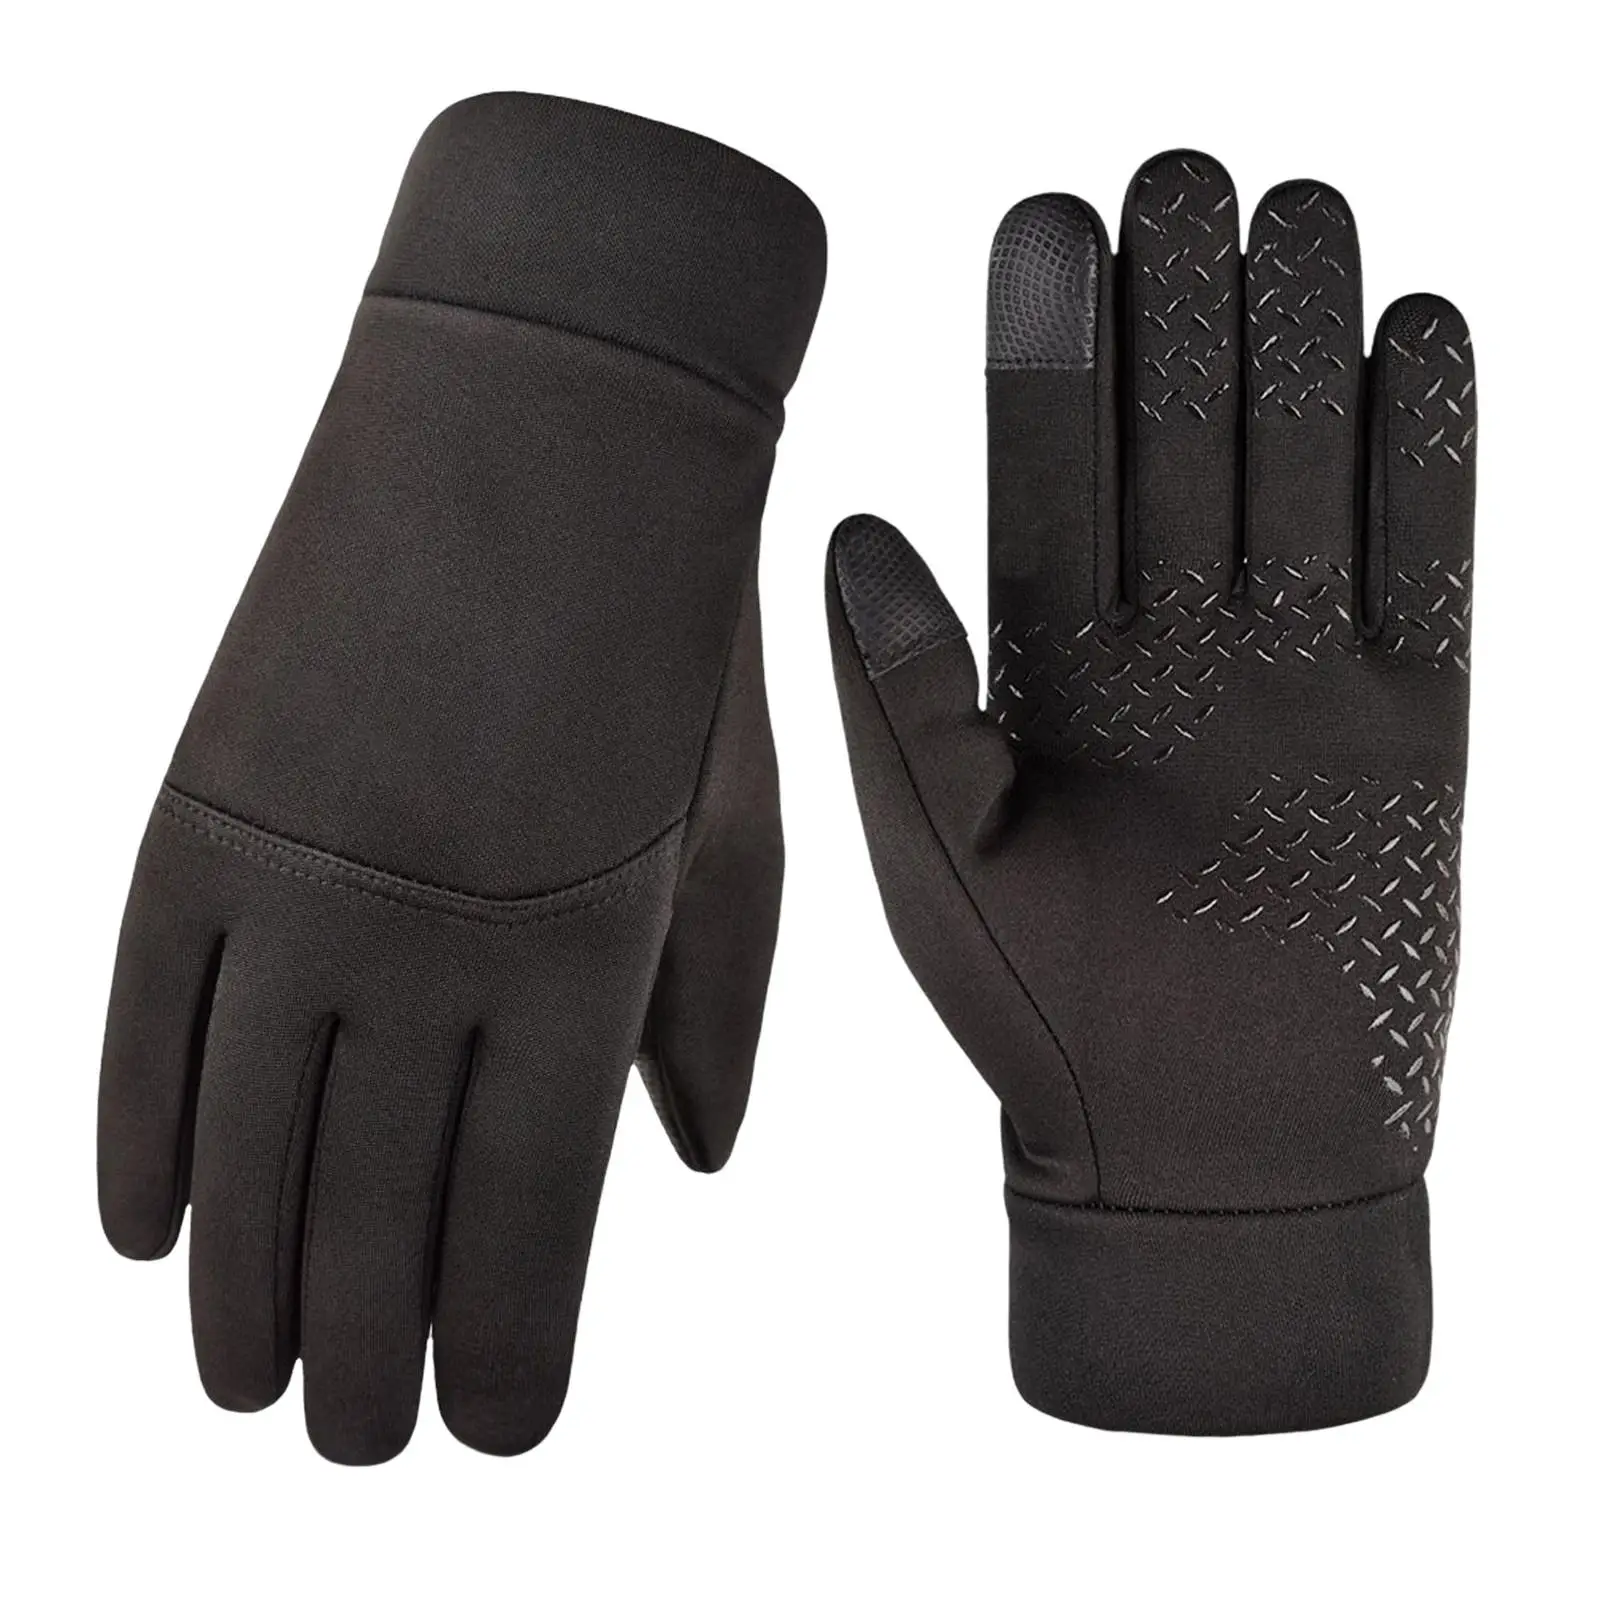 Windproof Winter Gloves Riding Gloves for Outdoor Activities Skating Fishing